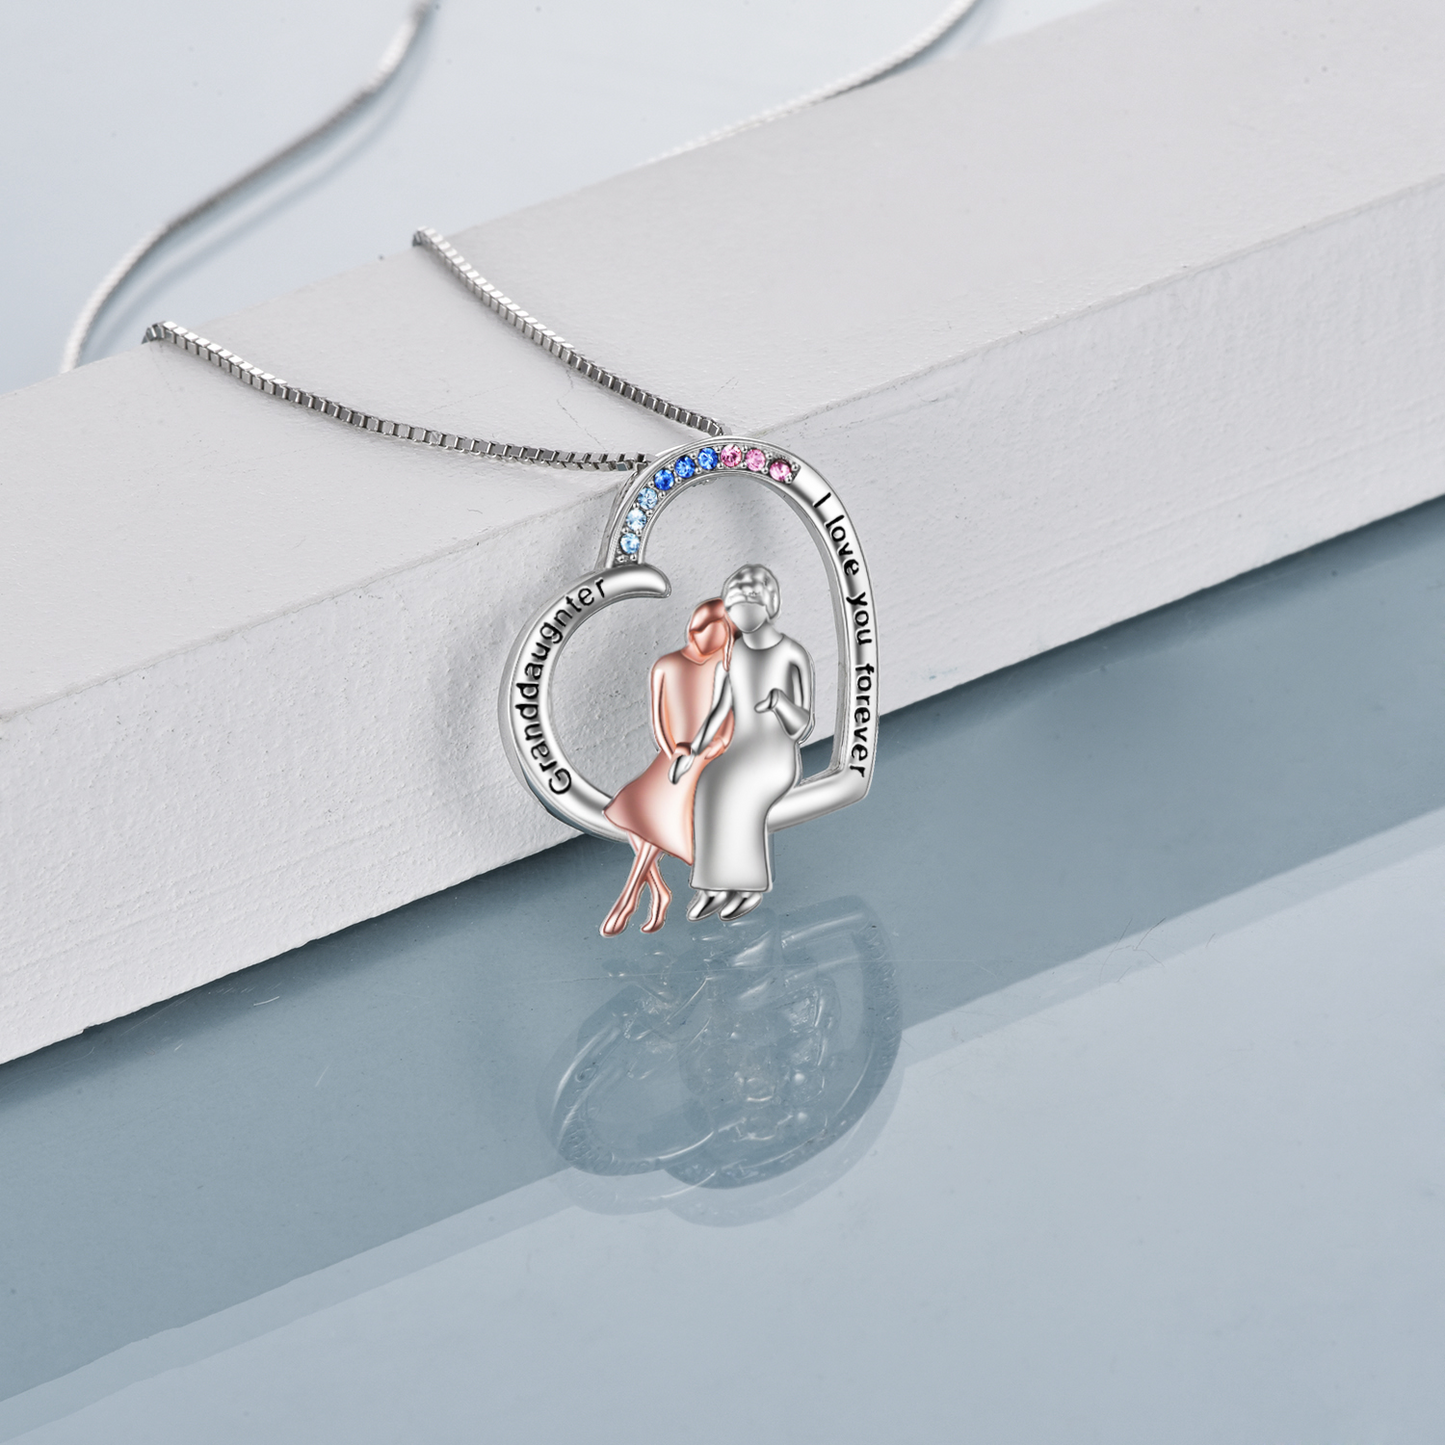 grandma to granddaughter s925 sterling silver heart-shaped necklace (gift box included)